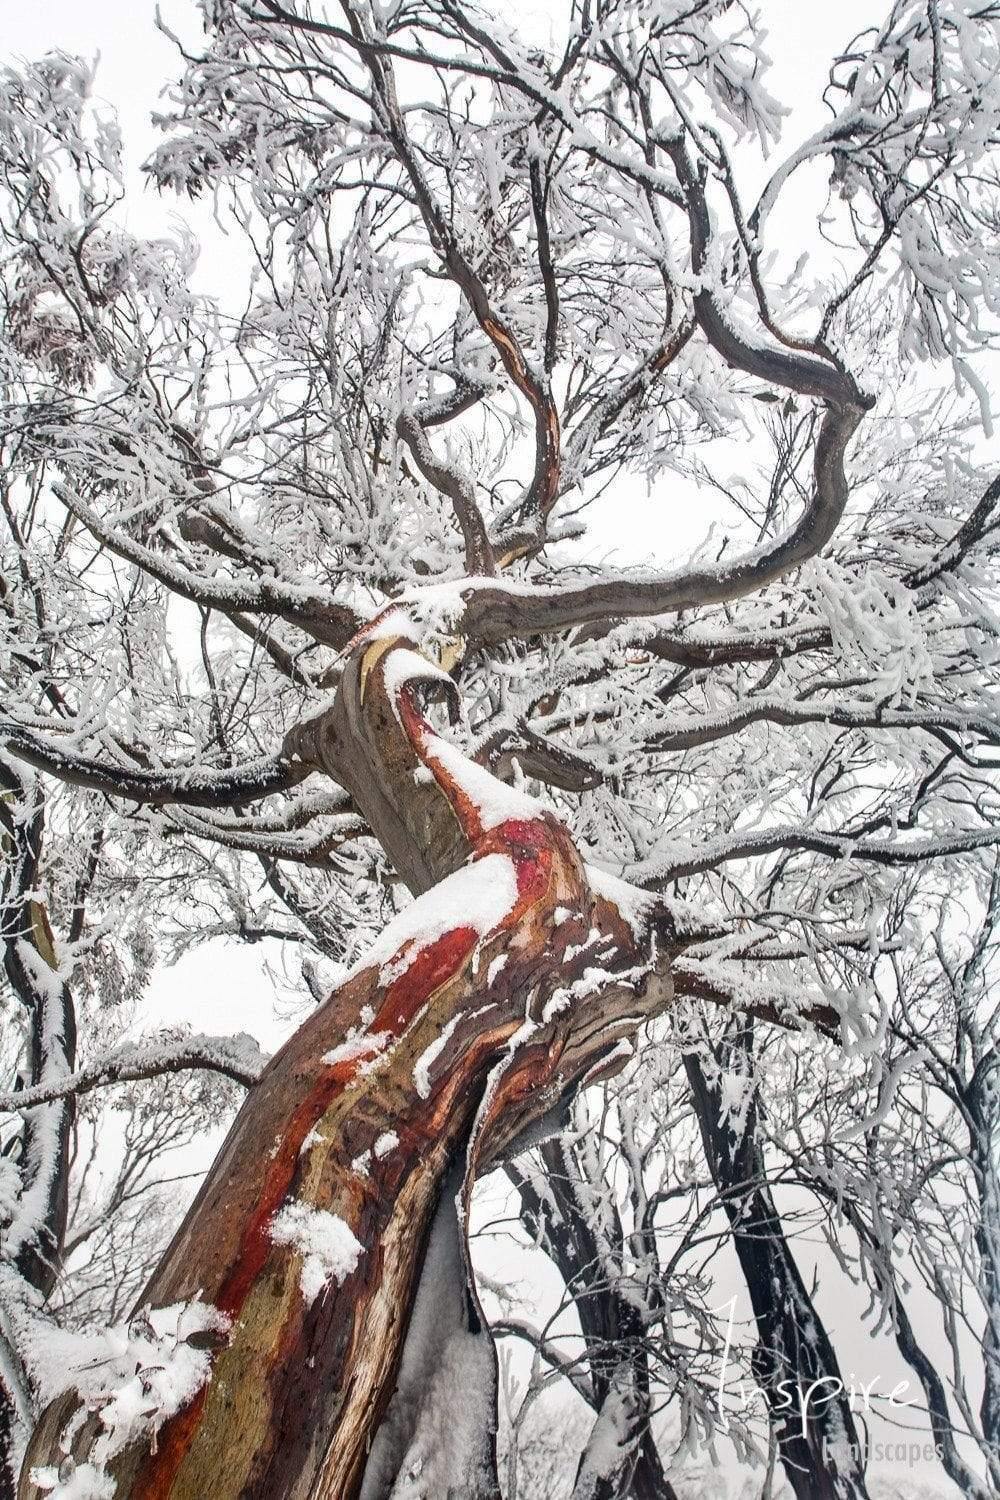 Long gum snow with a lot of branches covered with snow, Reaching Up - Mount Buller VIC